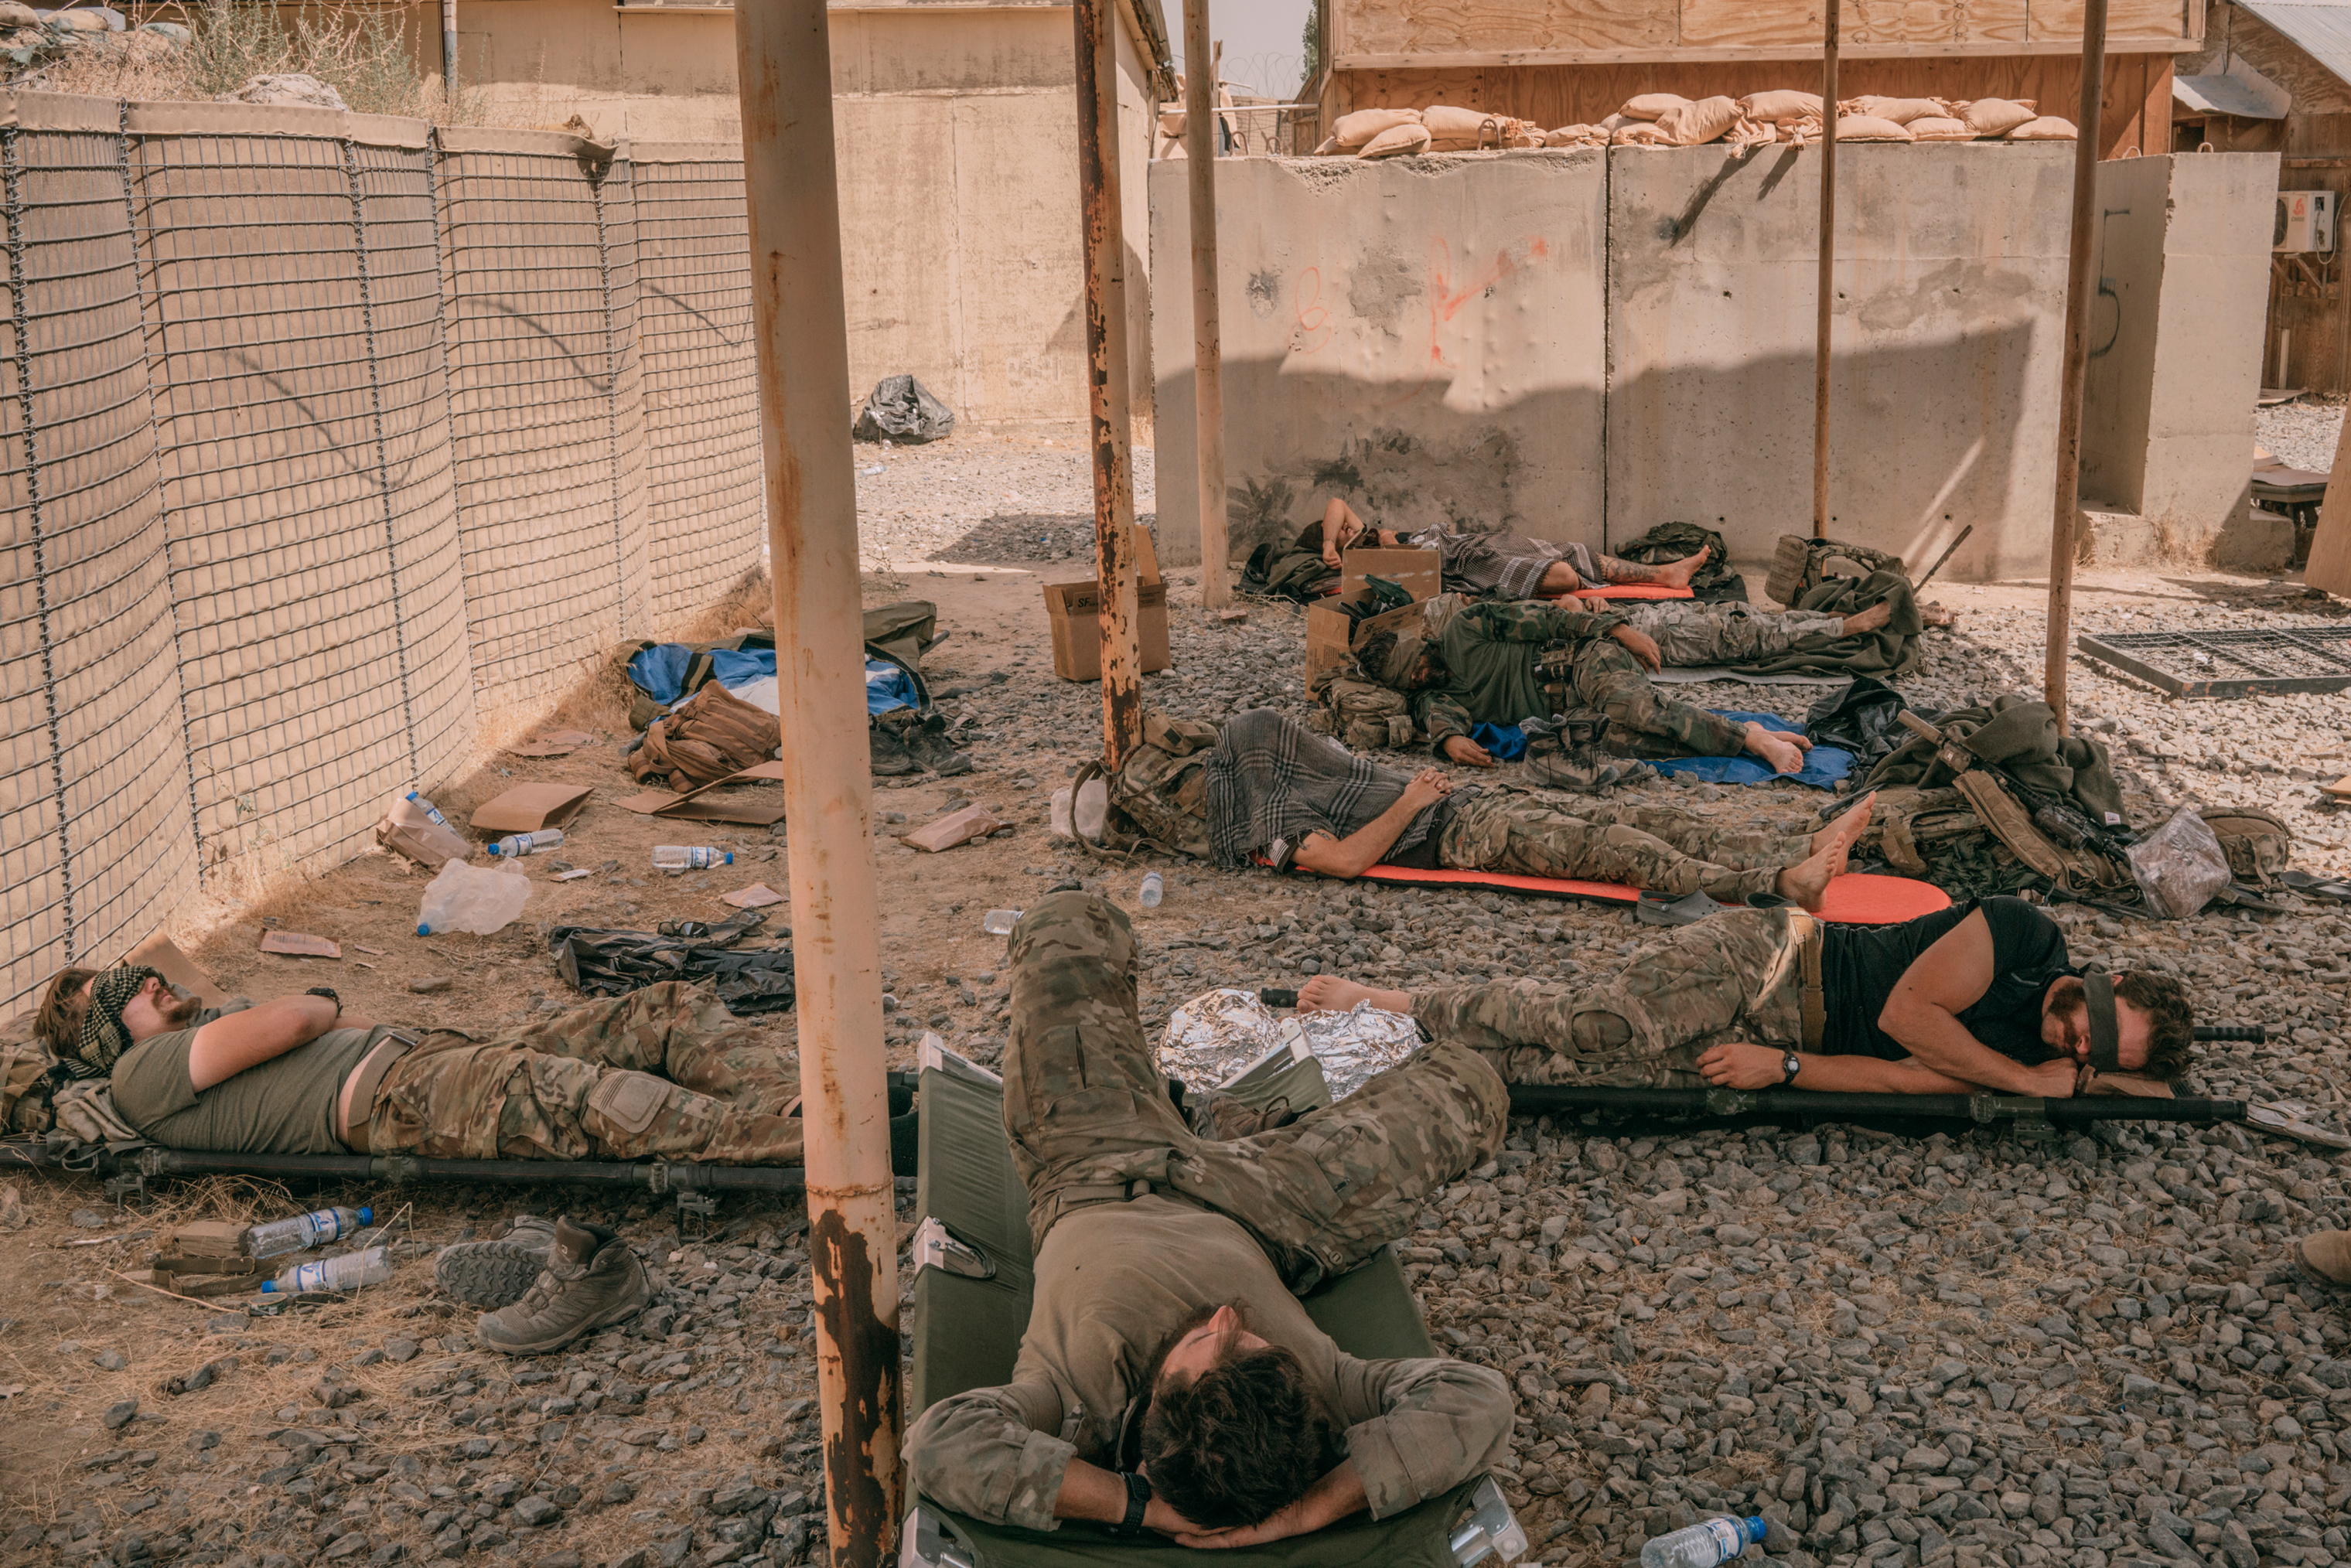 Special Forces soldiers sleep at a military outpost. (Emanuele Satolli for TIME)